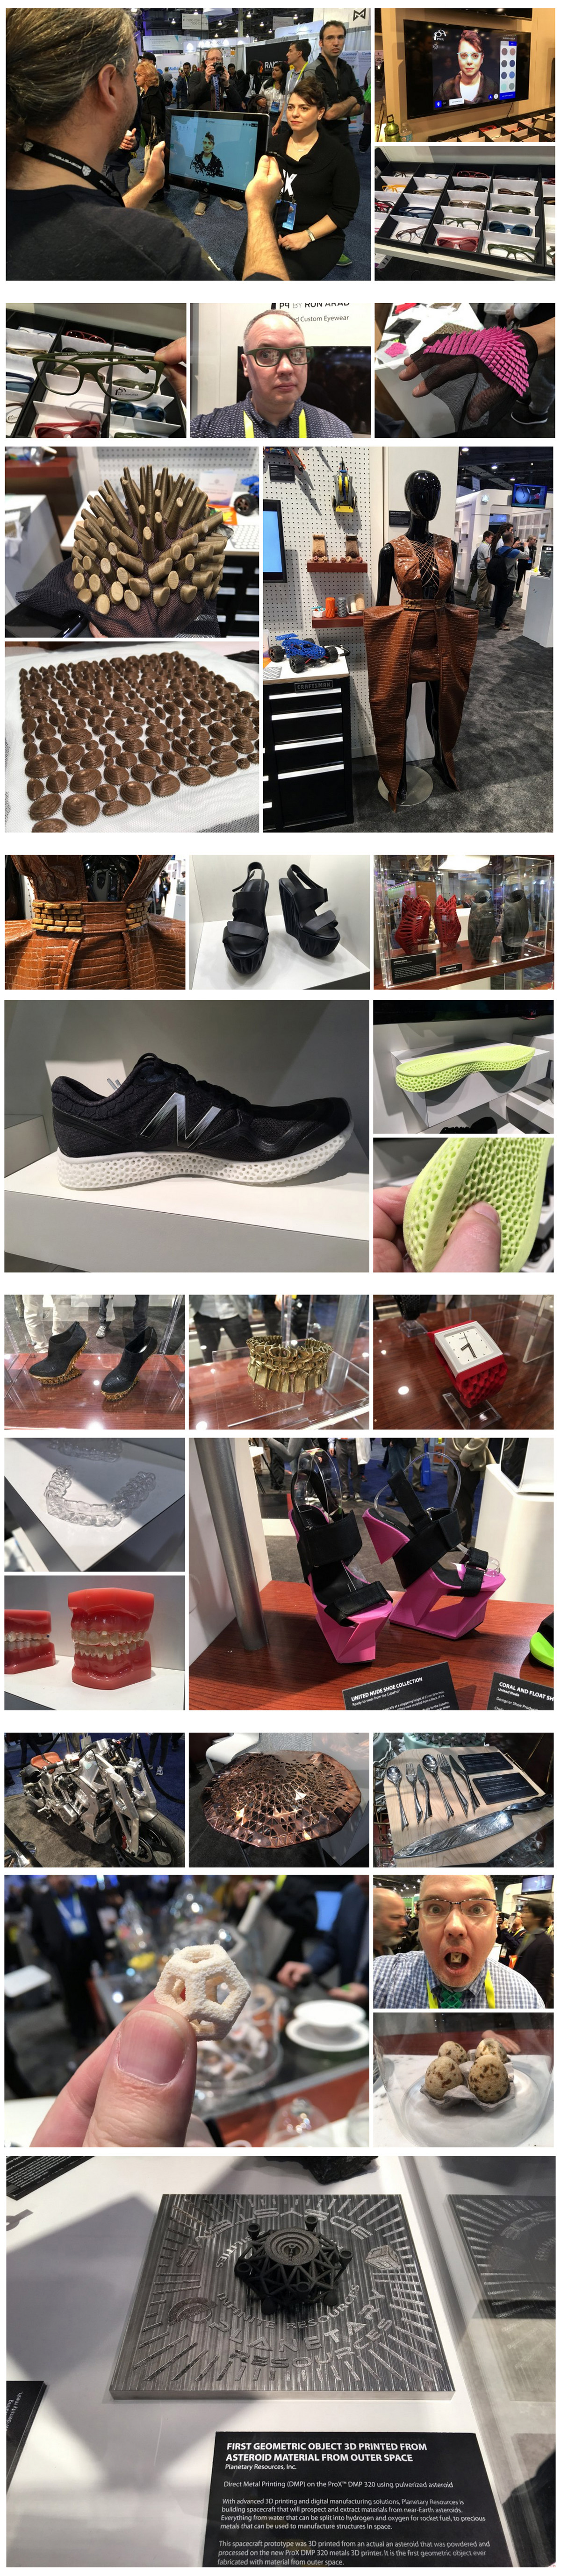 3D printing at CES 2016 from john biehler 2